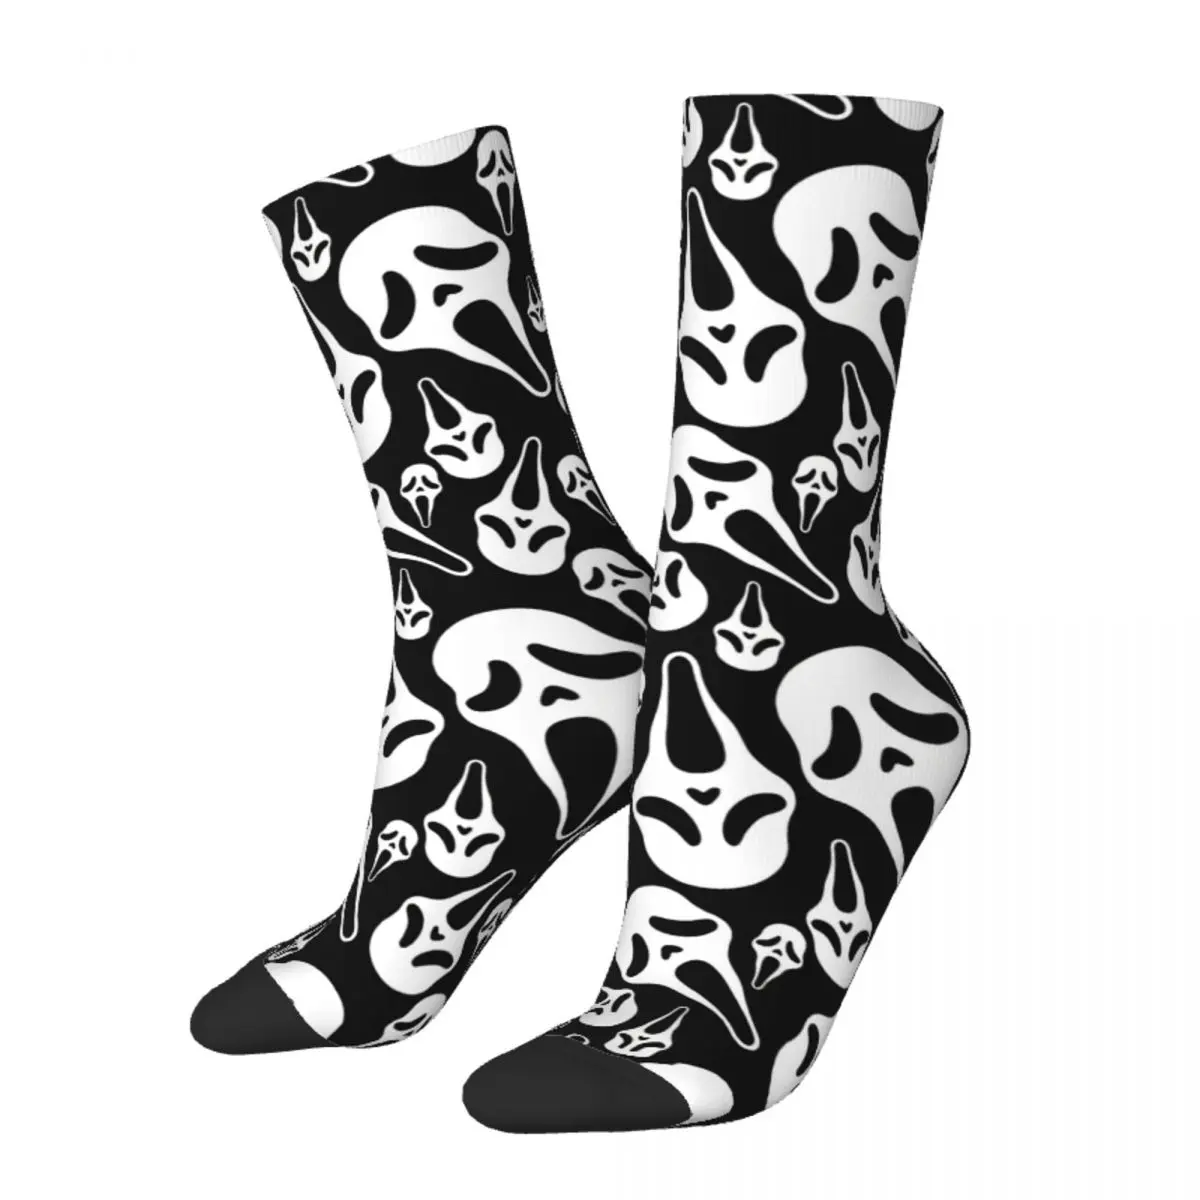 Funny Crazy Sock for Men Ghostface Repeat Hip Hop Harajuku Horror Movies Seamless Pattern Printed Boys Crew Sock Novelty Gift